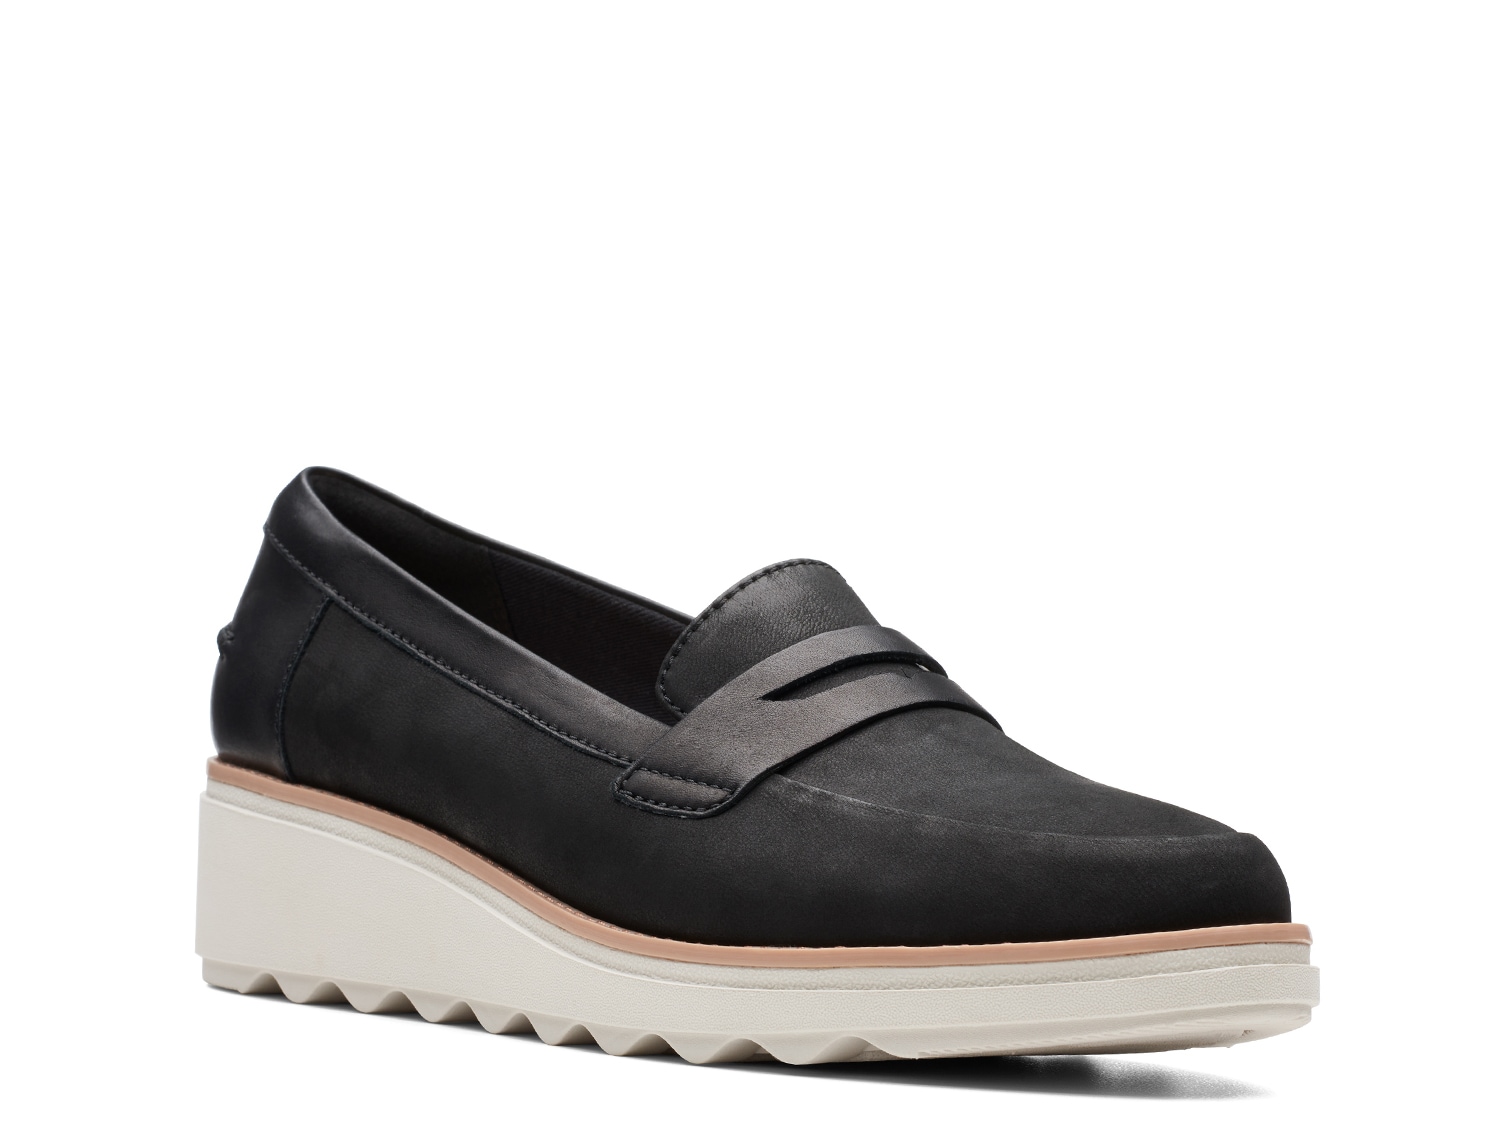 Clarks Sharon Ranch Wedge Penny Loafer 